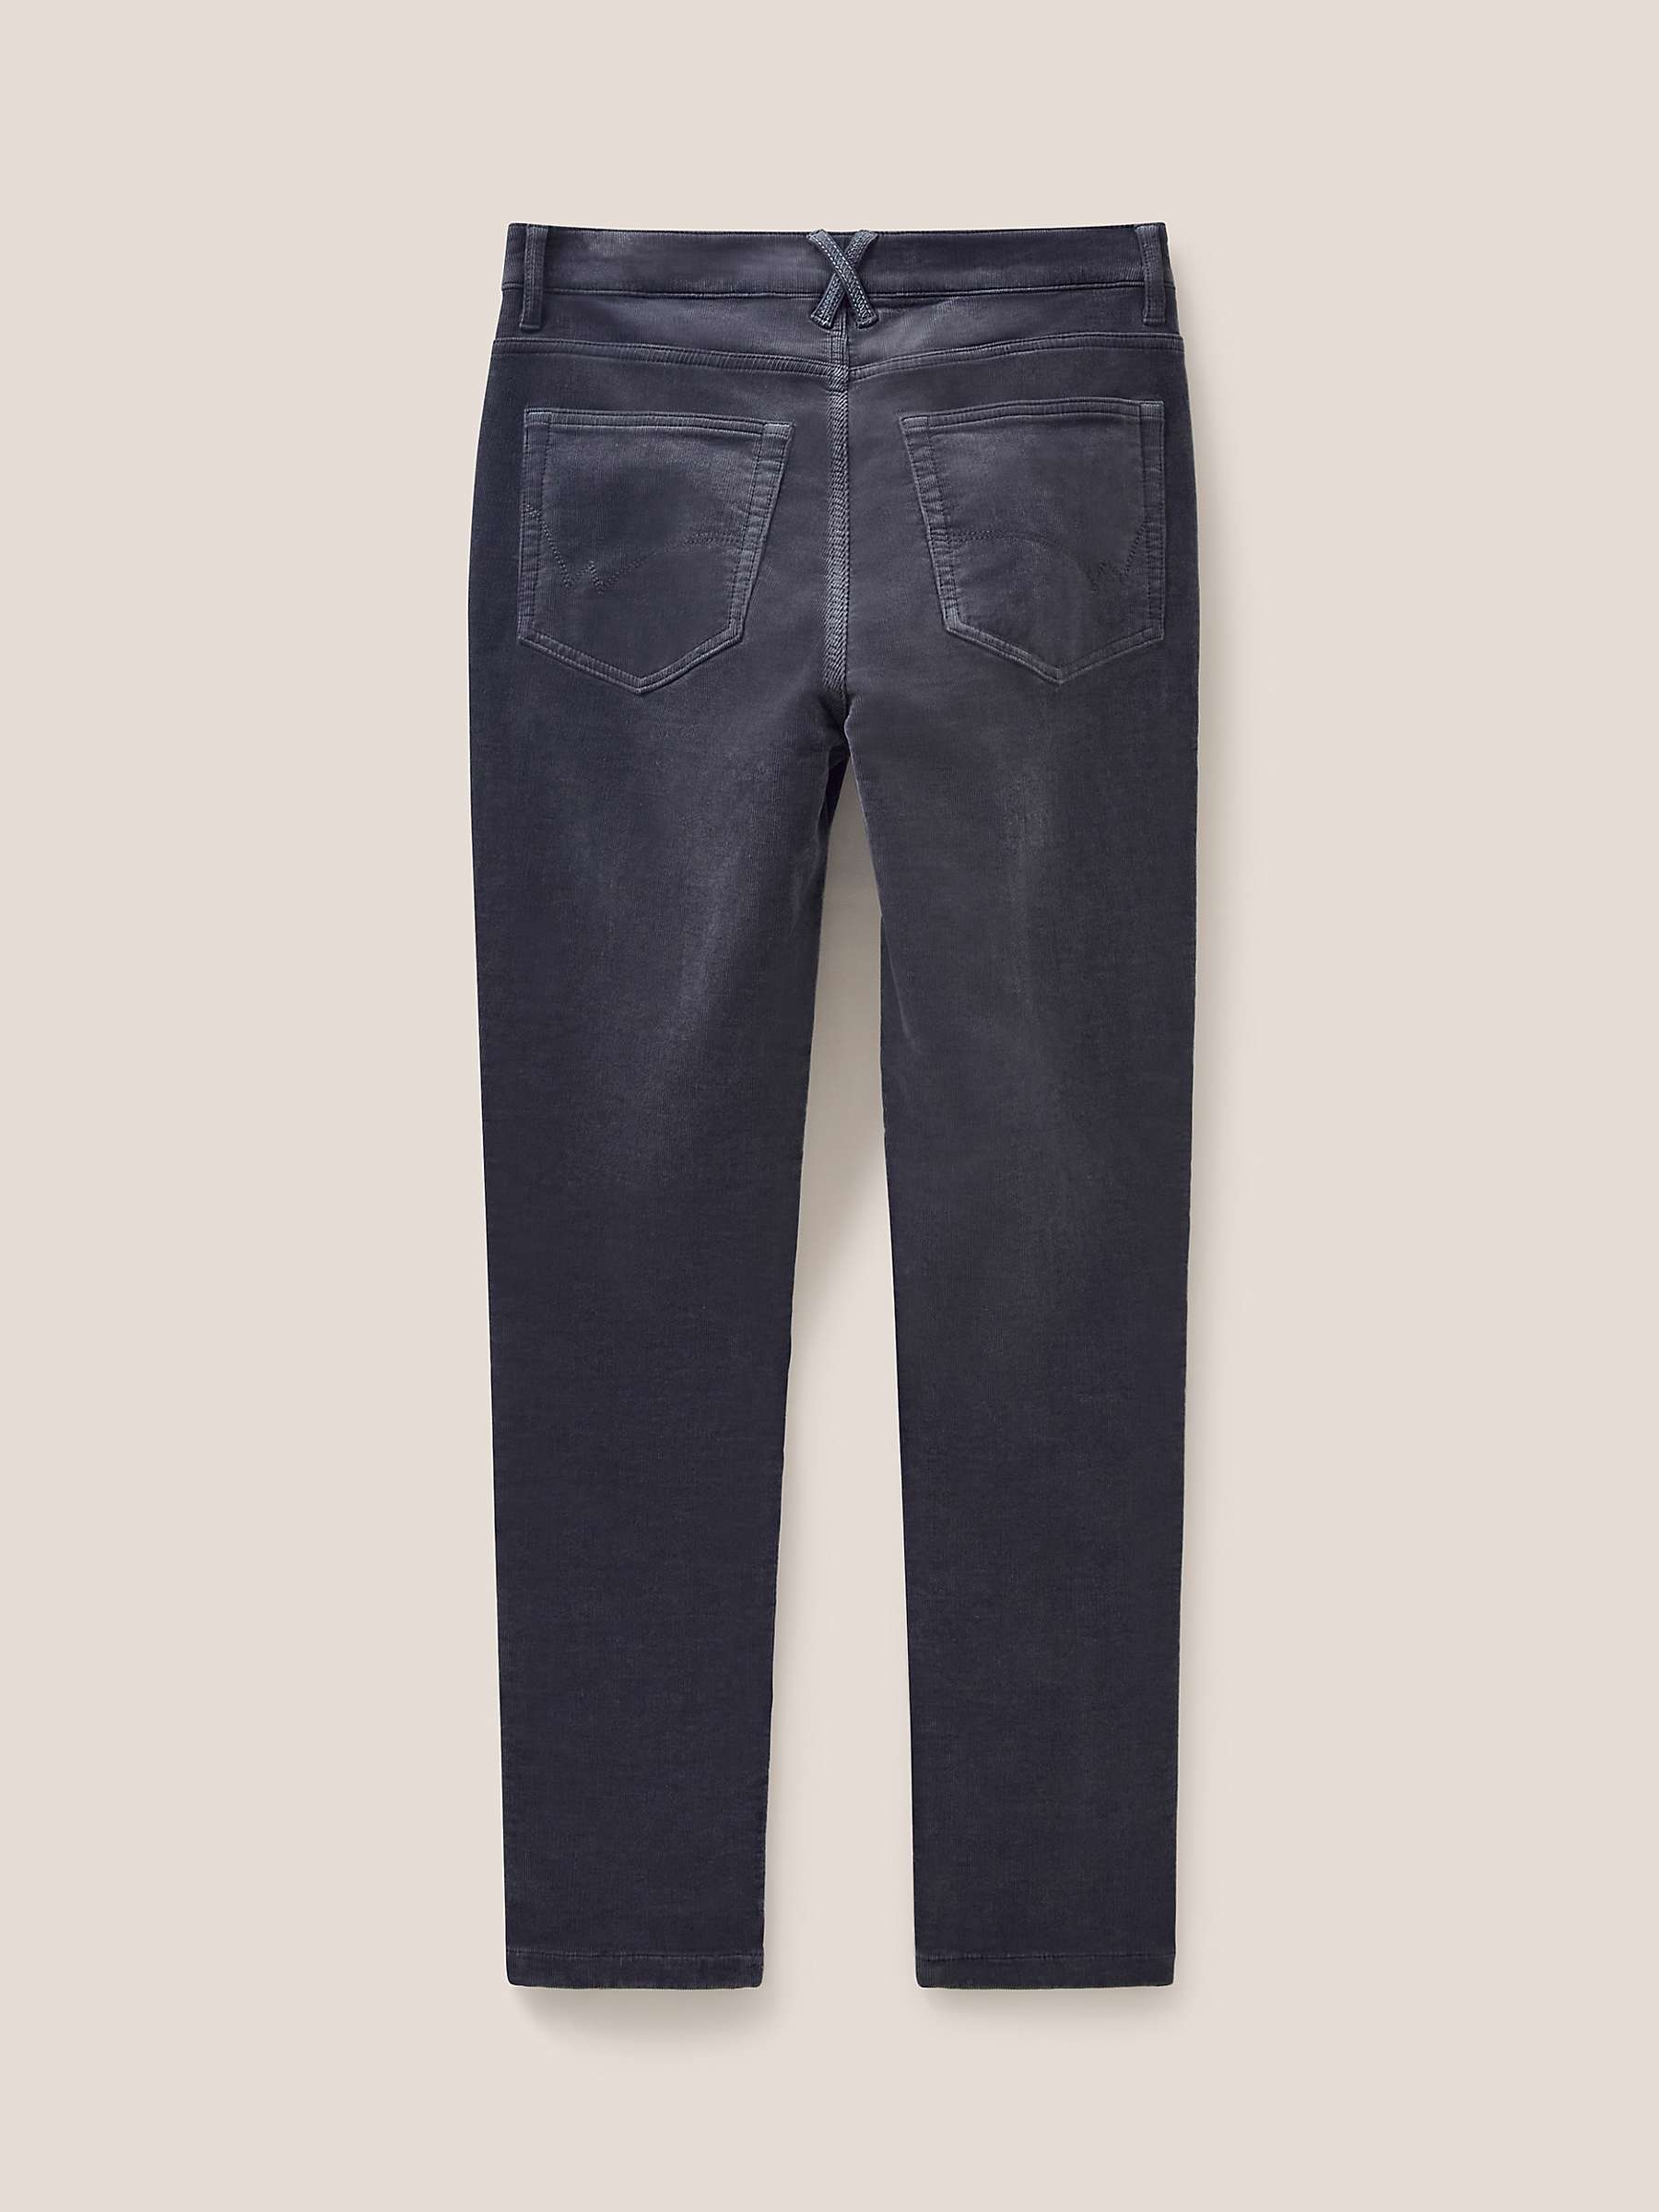 Buy White Stuff Amelia Skinny Cord Trousers, Mid Grey Online at johnlewis.com